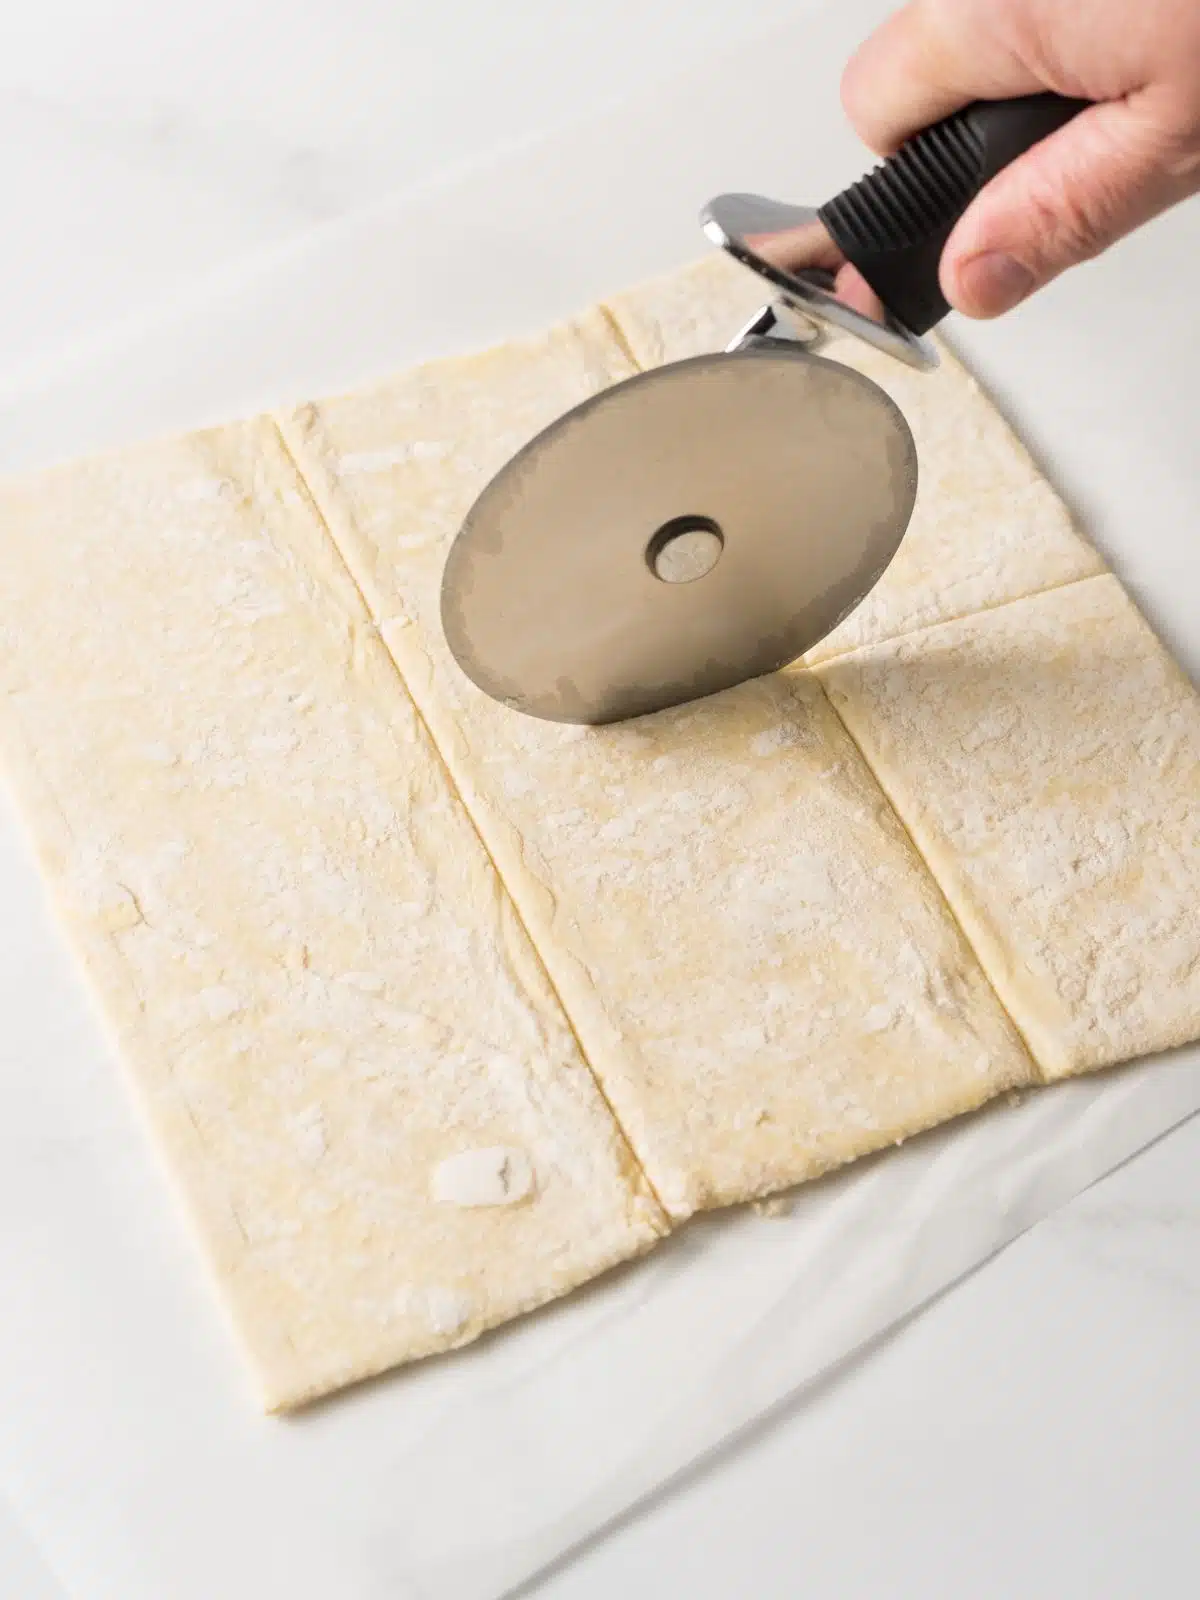 Cutting the puff pastry into 6 pieces with a pizza cutter